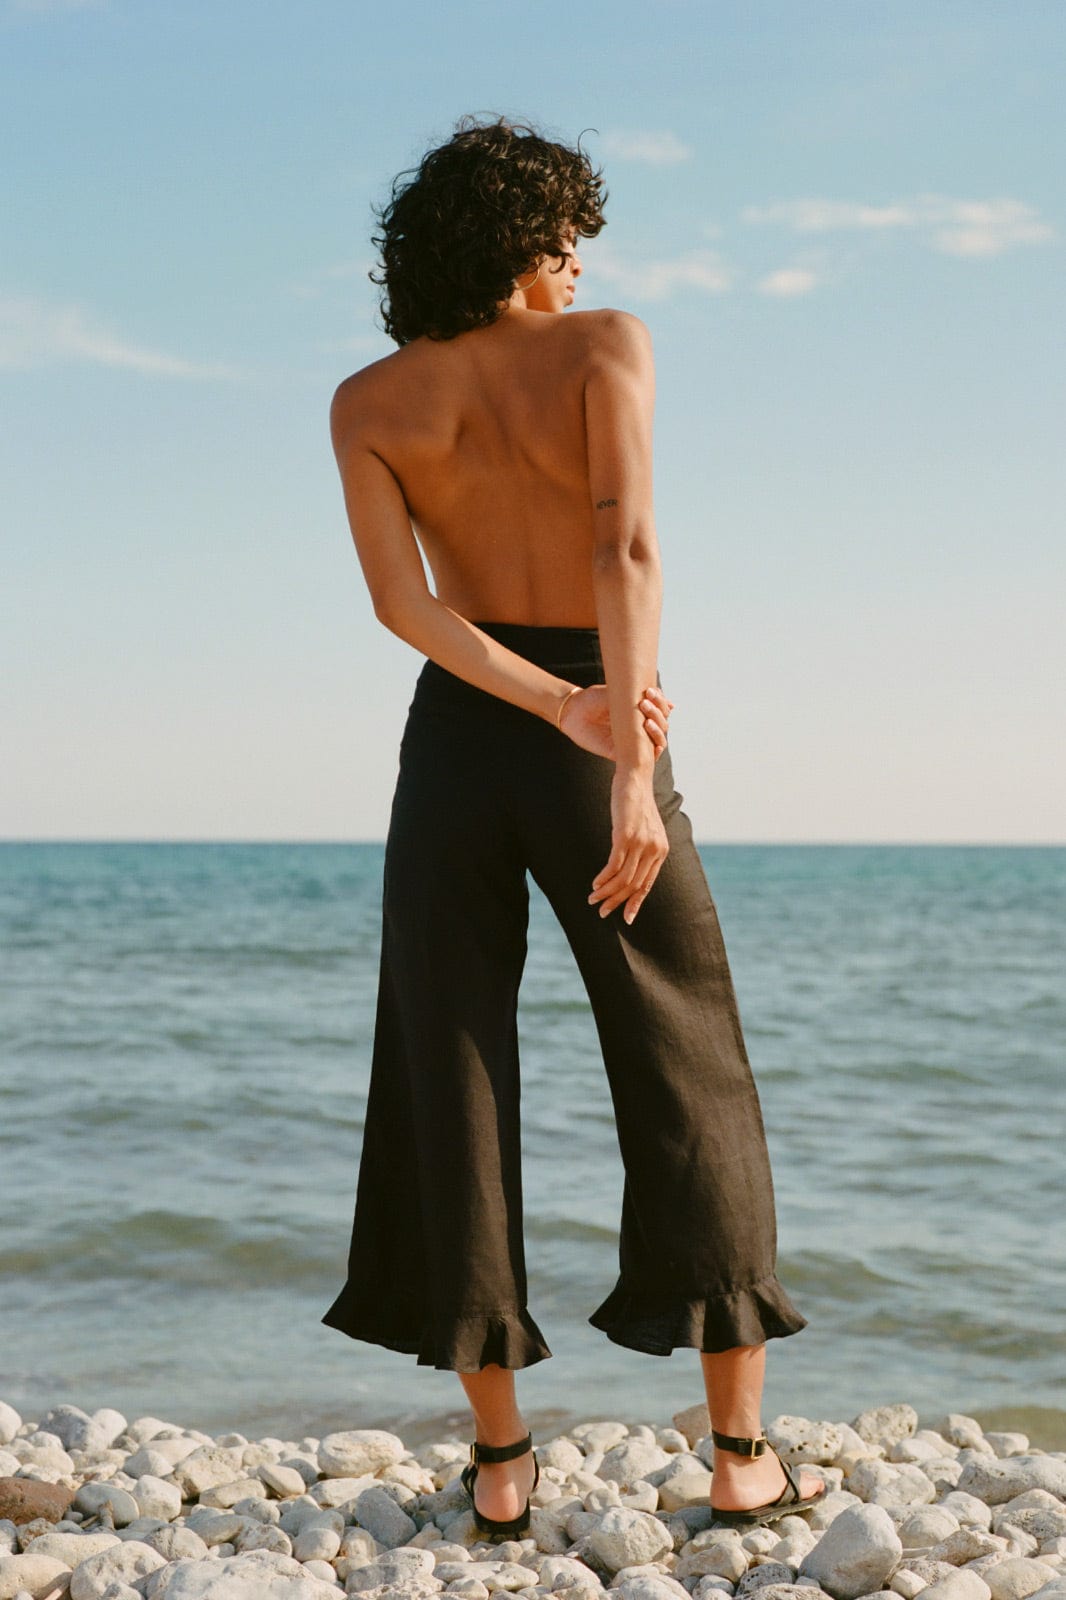 arkitaip Trousers The Clara Ruffled Linen Trousers in black